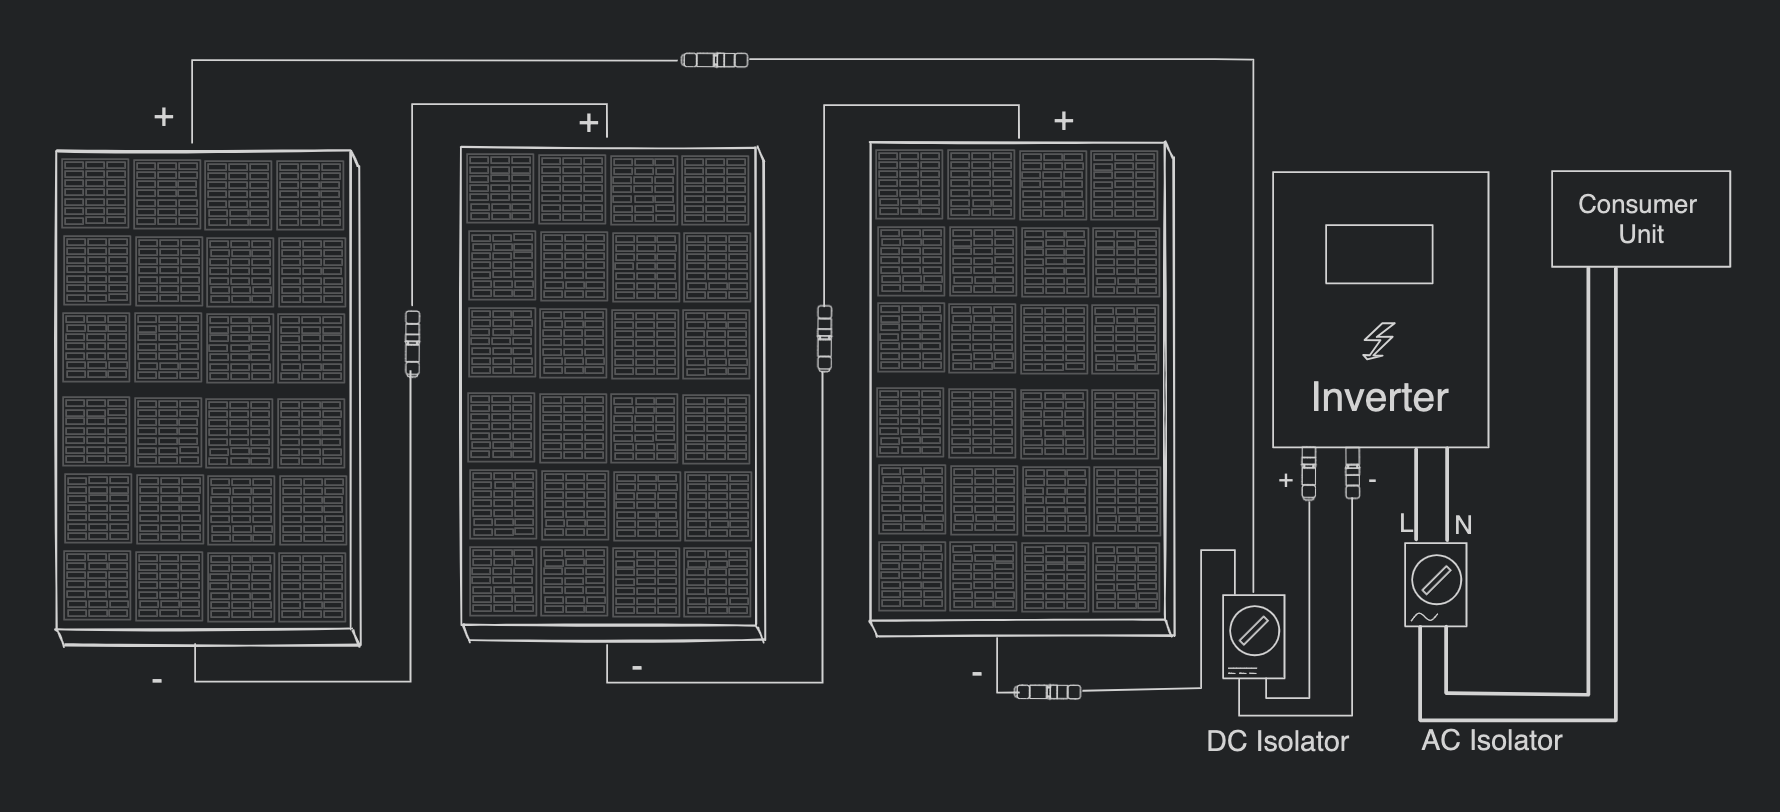 Diagram, white on black three solar panels connected in series. The panels are connected to an inverter via DC isolator. The inverter is connected to a Consumer Unit via AC isolator